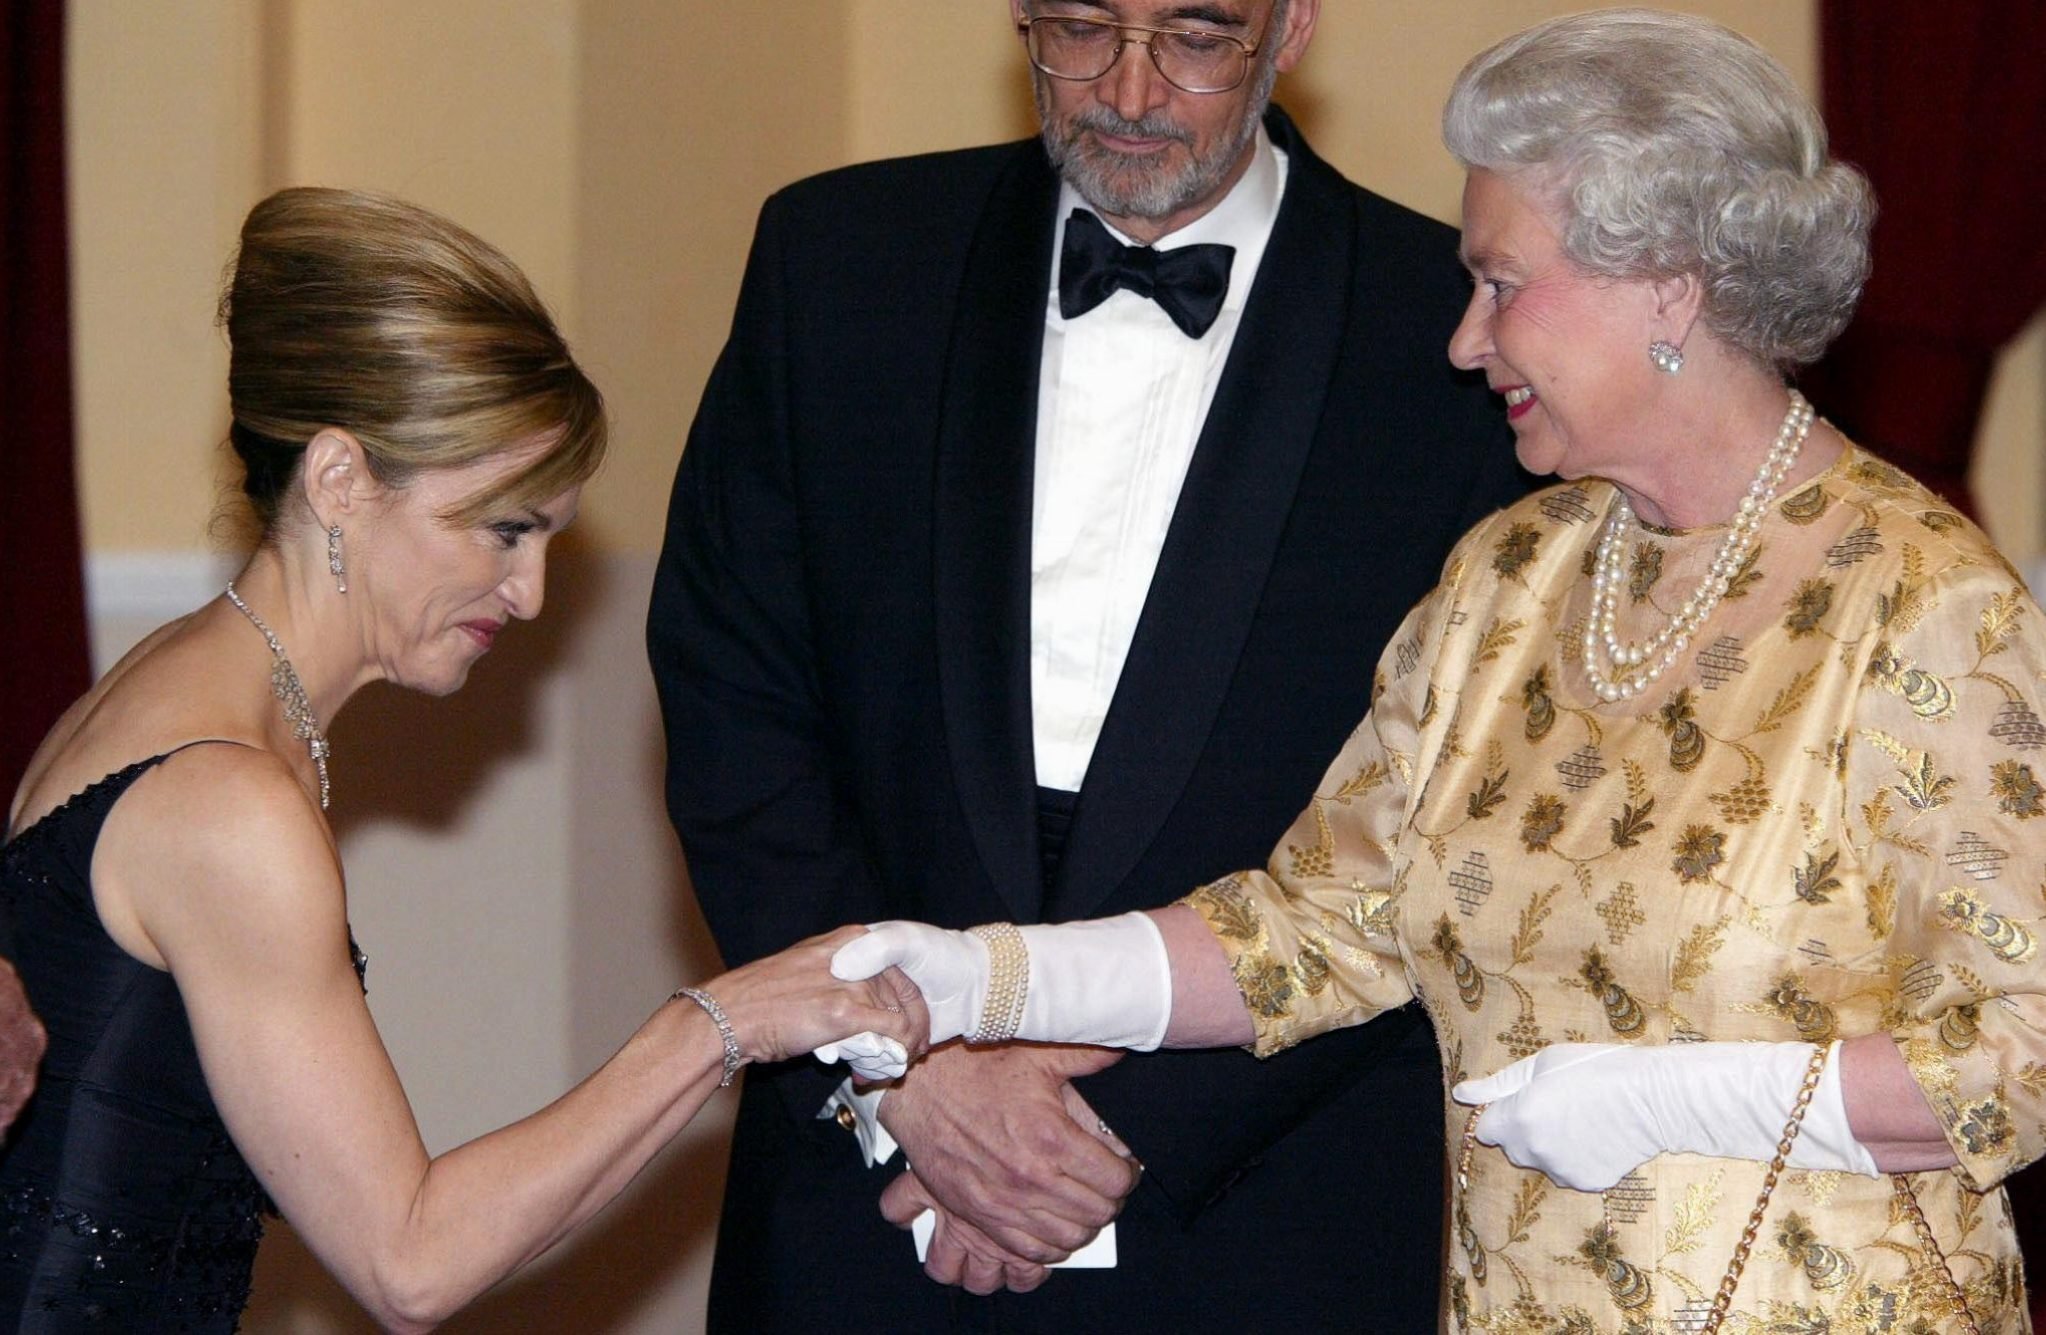 What Should You Do If You Meet a Royal? Rules About Touching and Greeting Them Explained